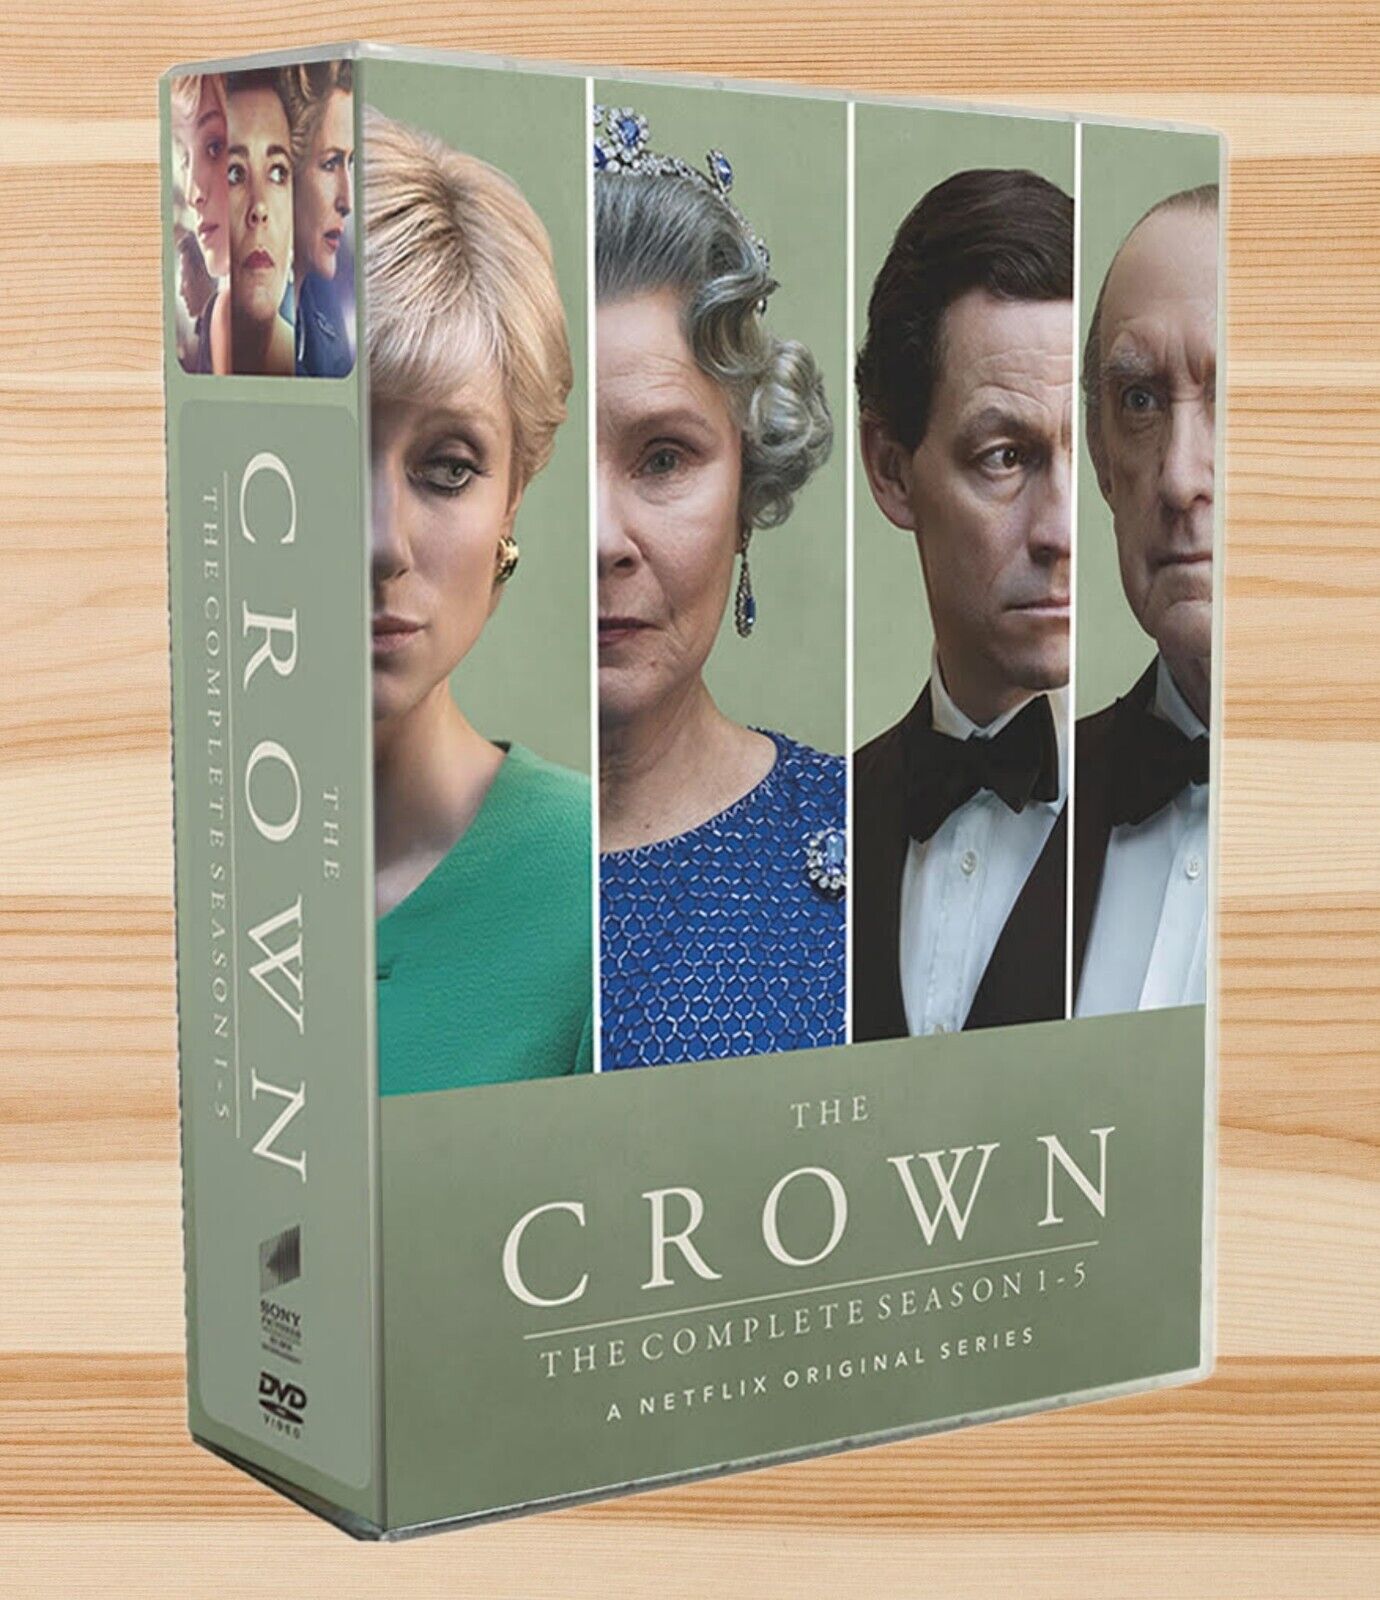 The Crown: The Complete Series, Season 1-5 (DVD) Free Delivery